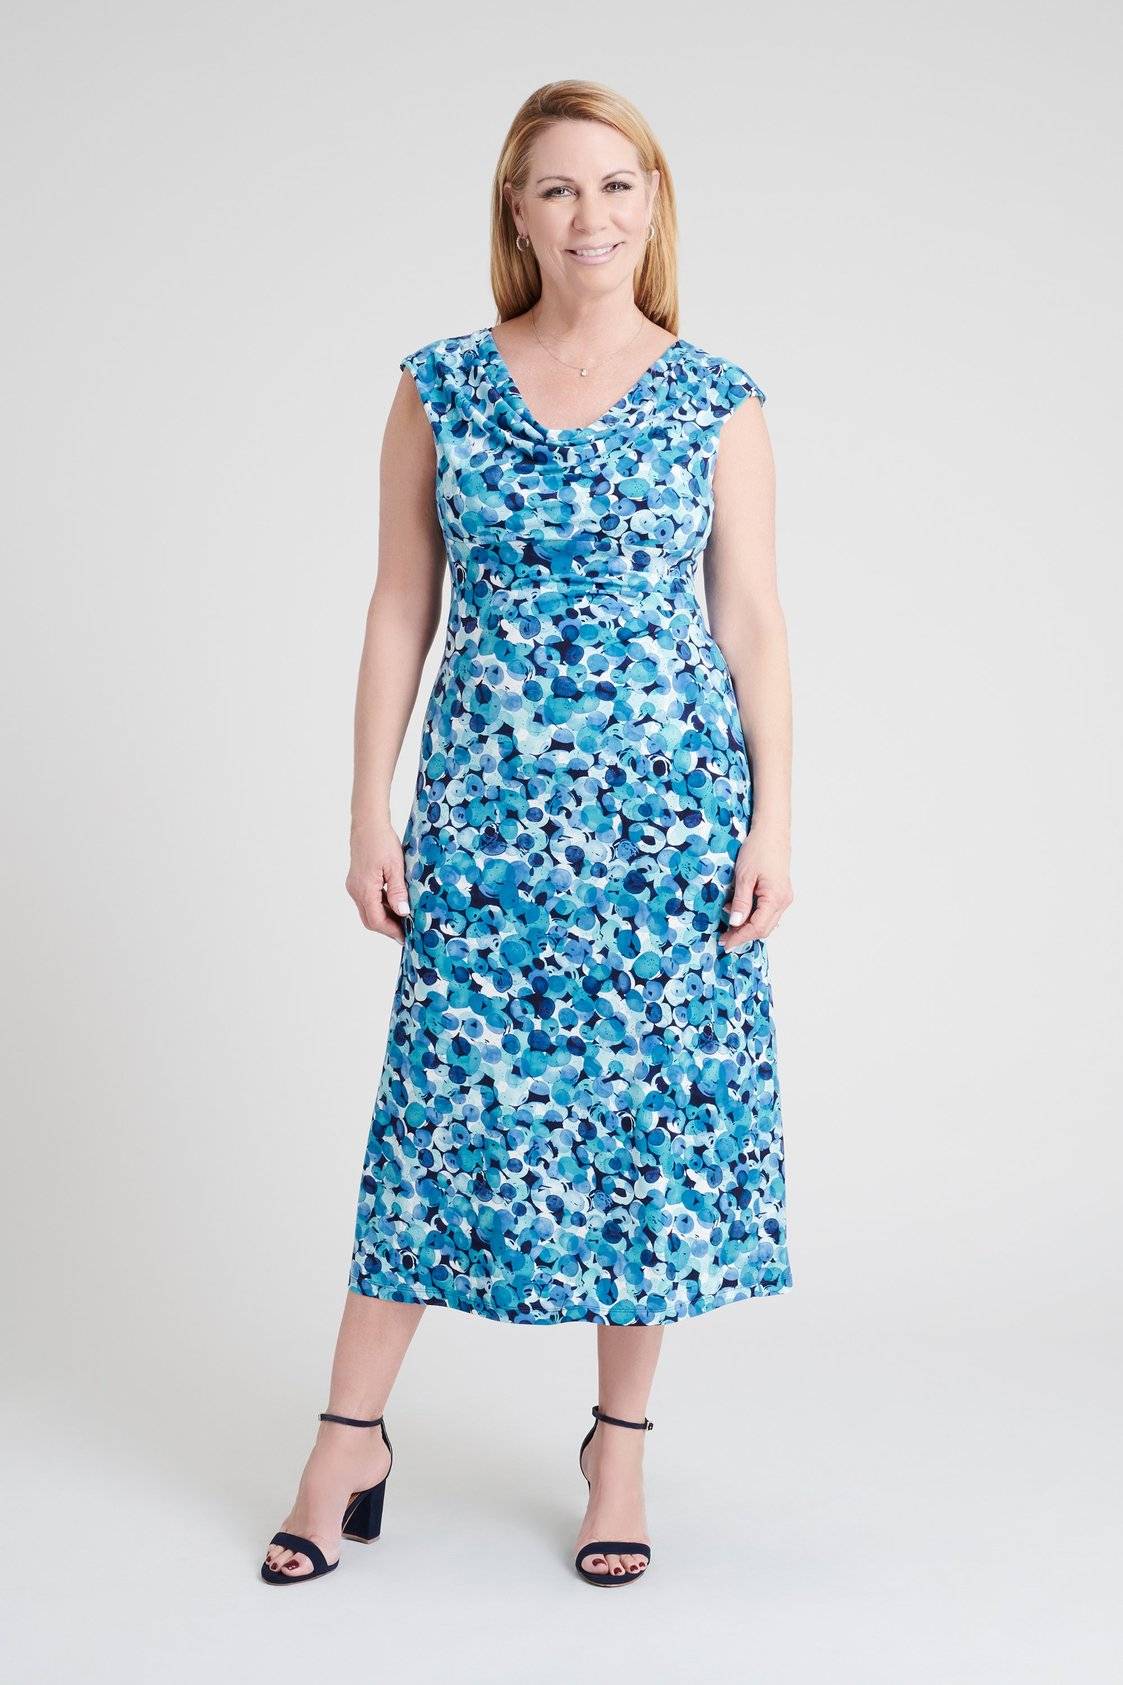 blonde woman posing in a studio wearing a multi-hue light blue bubble dot print calf-length sleeveless dress with cowl neck from connected apparel